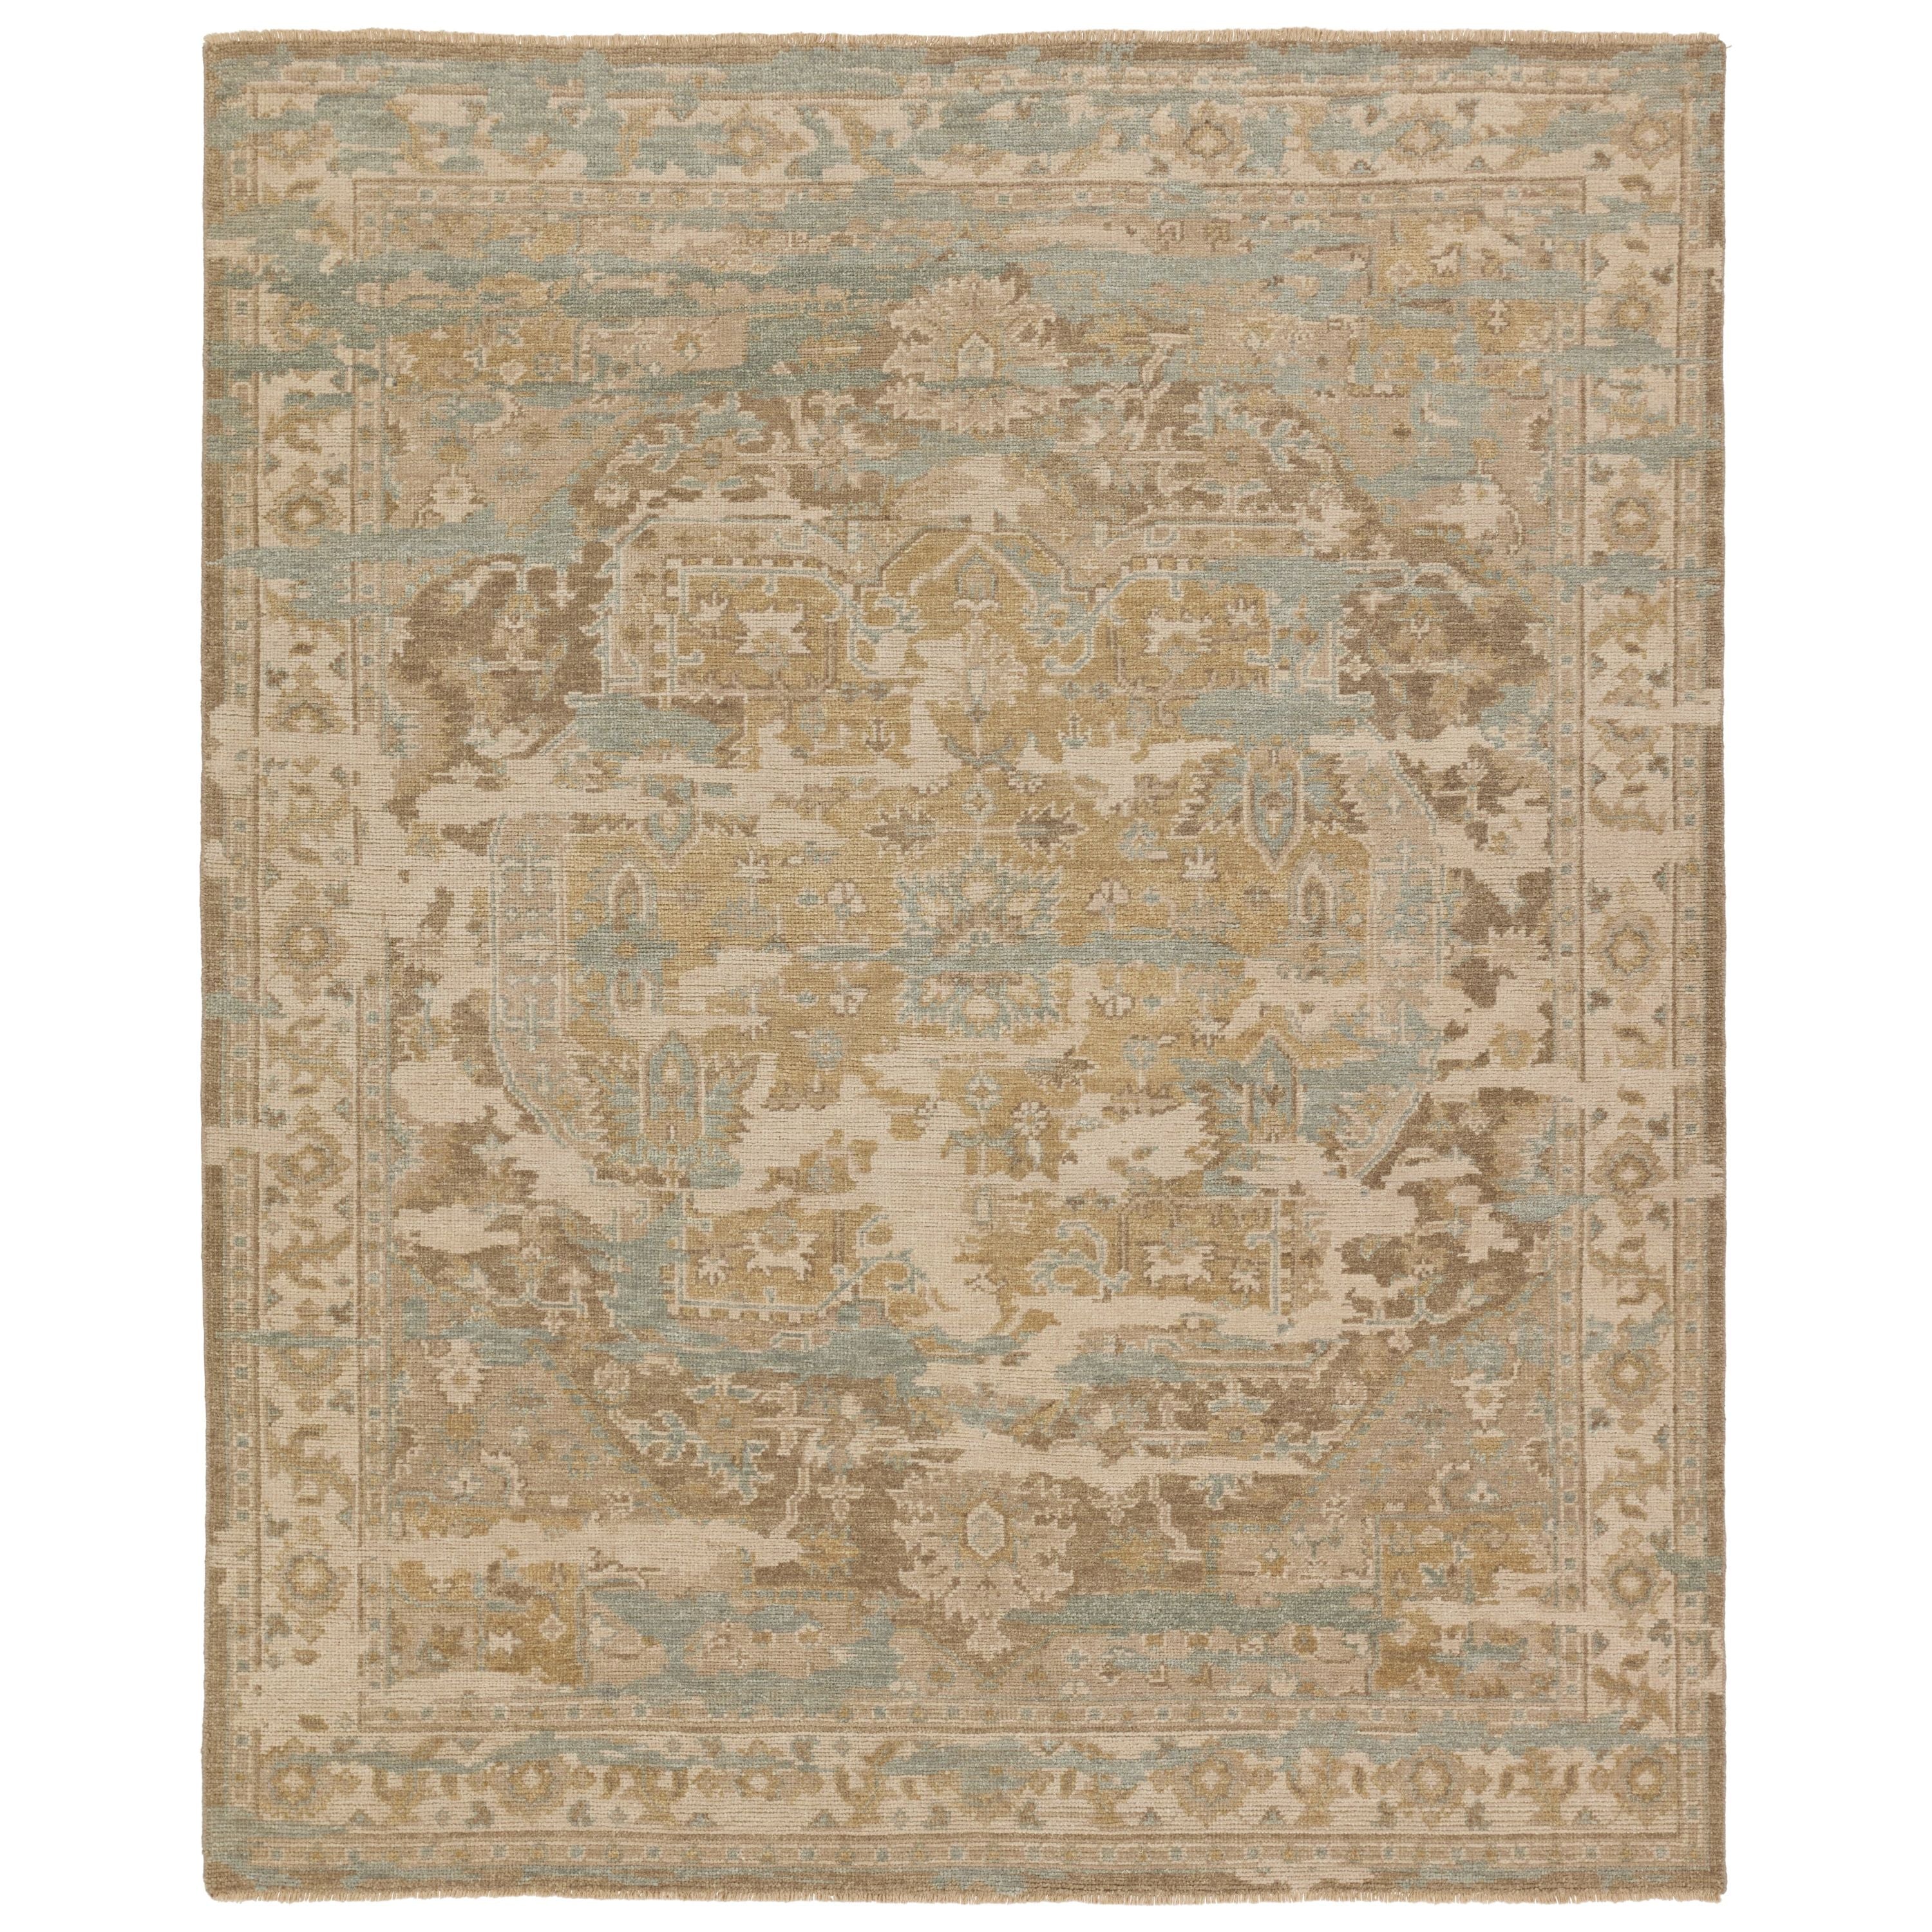 The Rhapsody collection features heirloom-quality designs of stunningly abrashed Old World patterns. The Cadenza area rug boasts a beautifully distressed medallion motif with a decorative border. The khaki tones are accented with slate, beige, cream, and taupe hues for added depth and intrigue. This durable wool handknot anchors living spaces with a fresh take on vintage style. Amethyst Home provides interior design, new construction, custom furniture, and area rugs in the Tampa metro area.